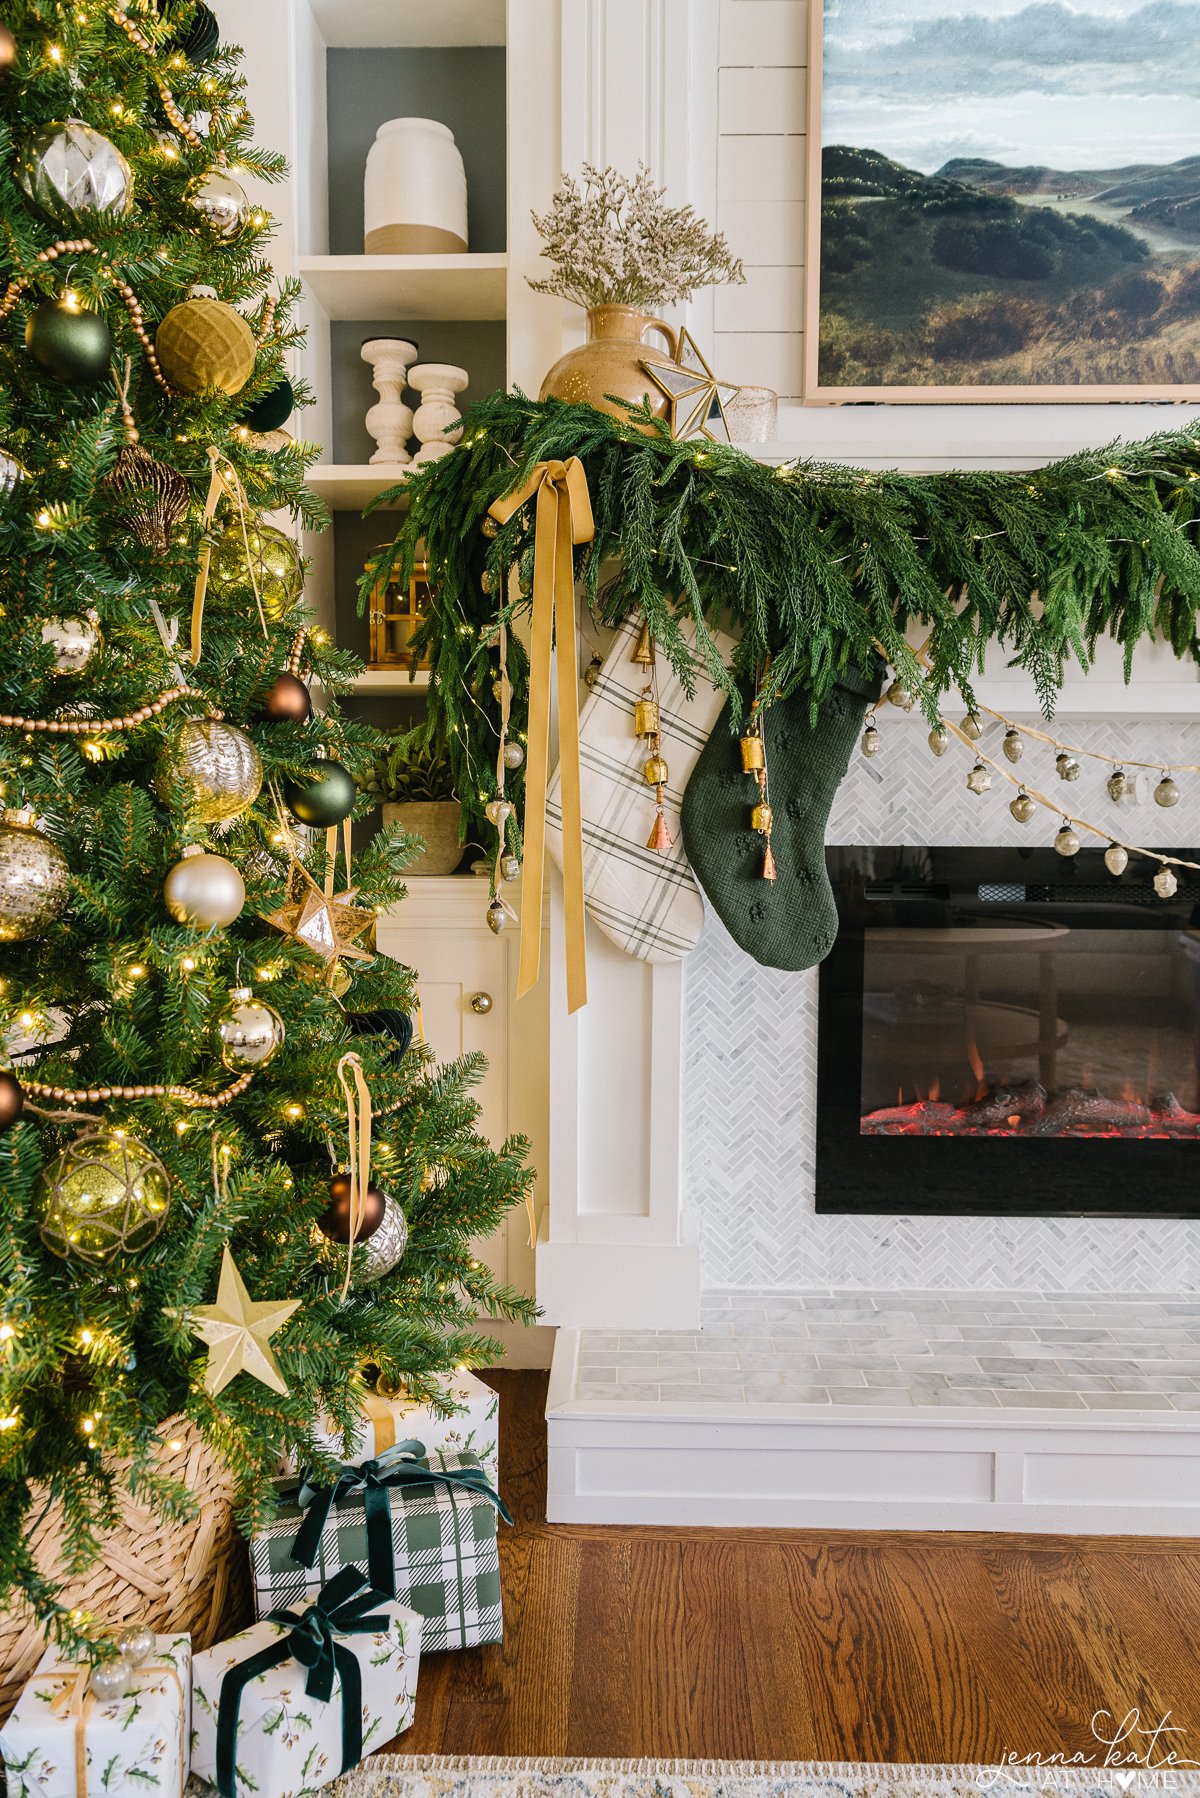 Fireplace mantel with garland, stockings hung and gold ribbon hung in a bow